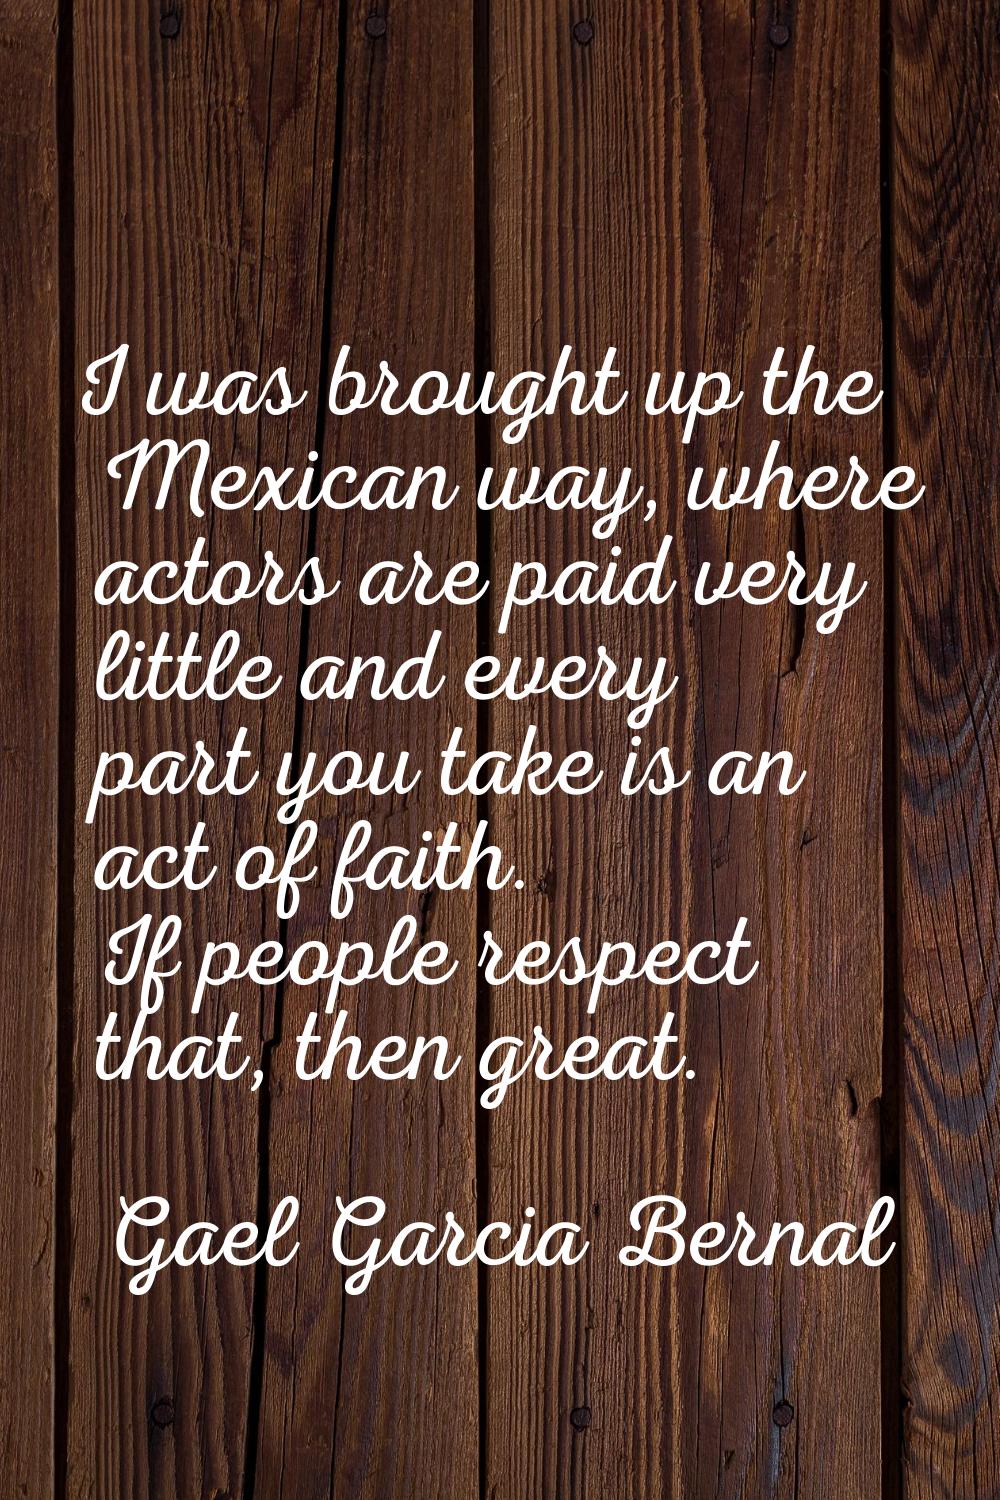 I was brought up the Mexican way, where actors are paid very little and every part you take is an a